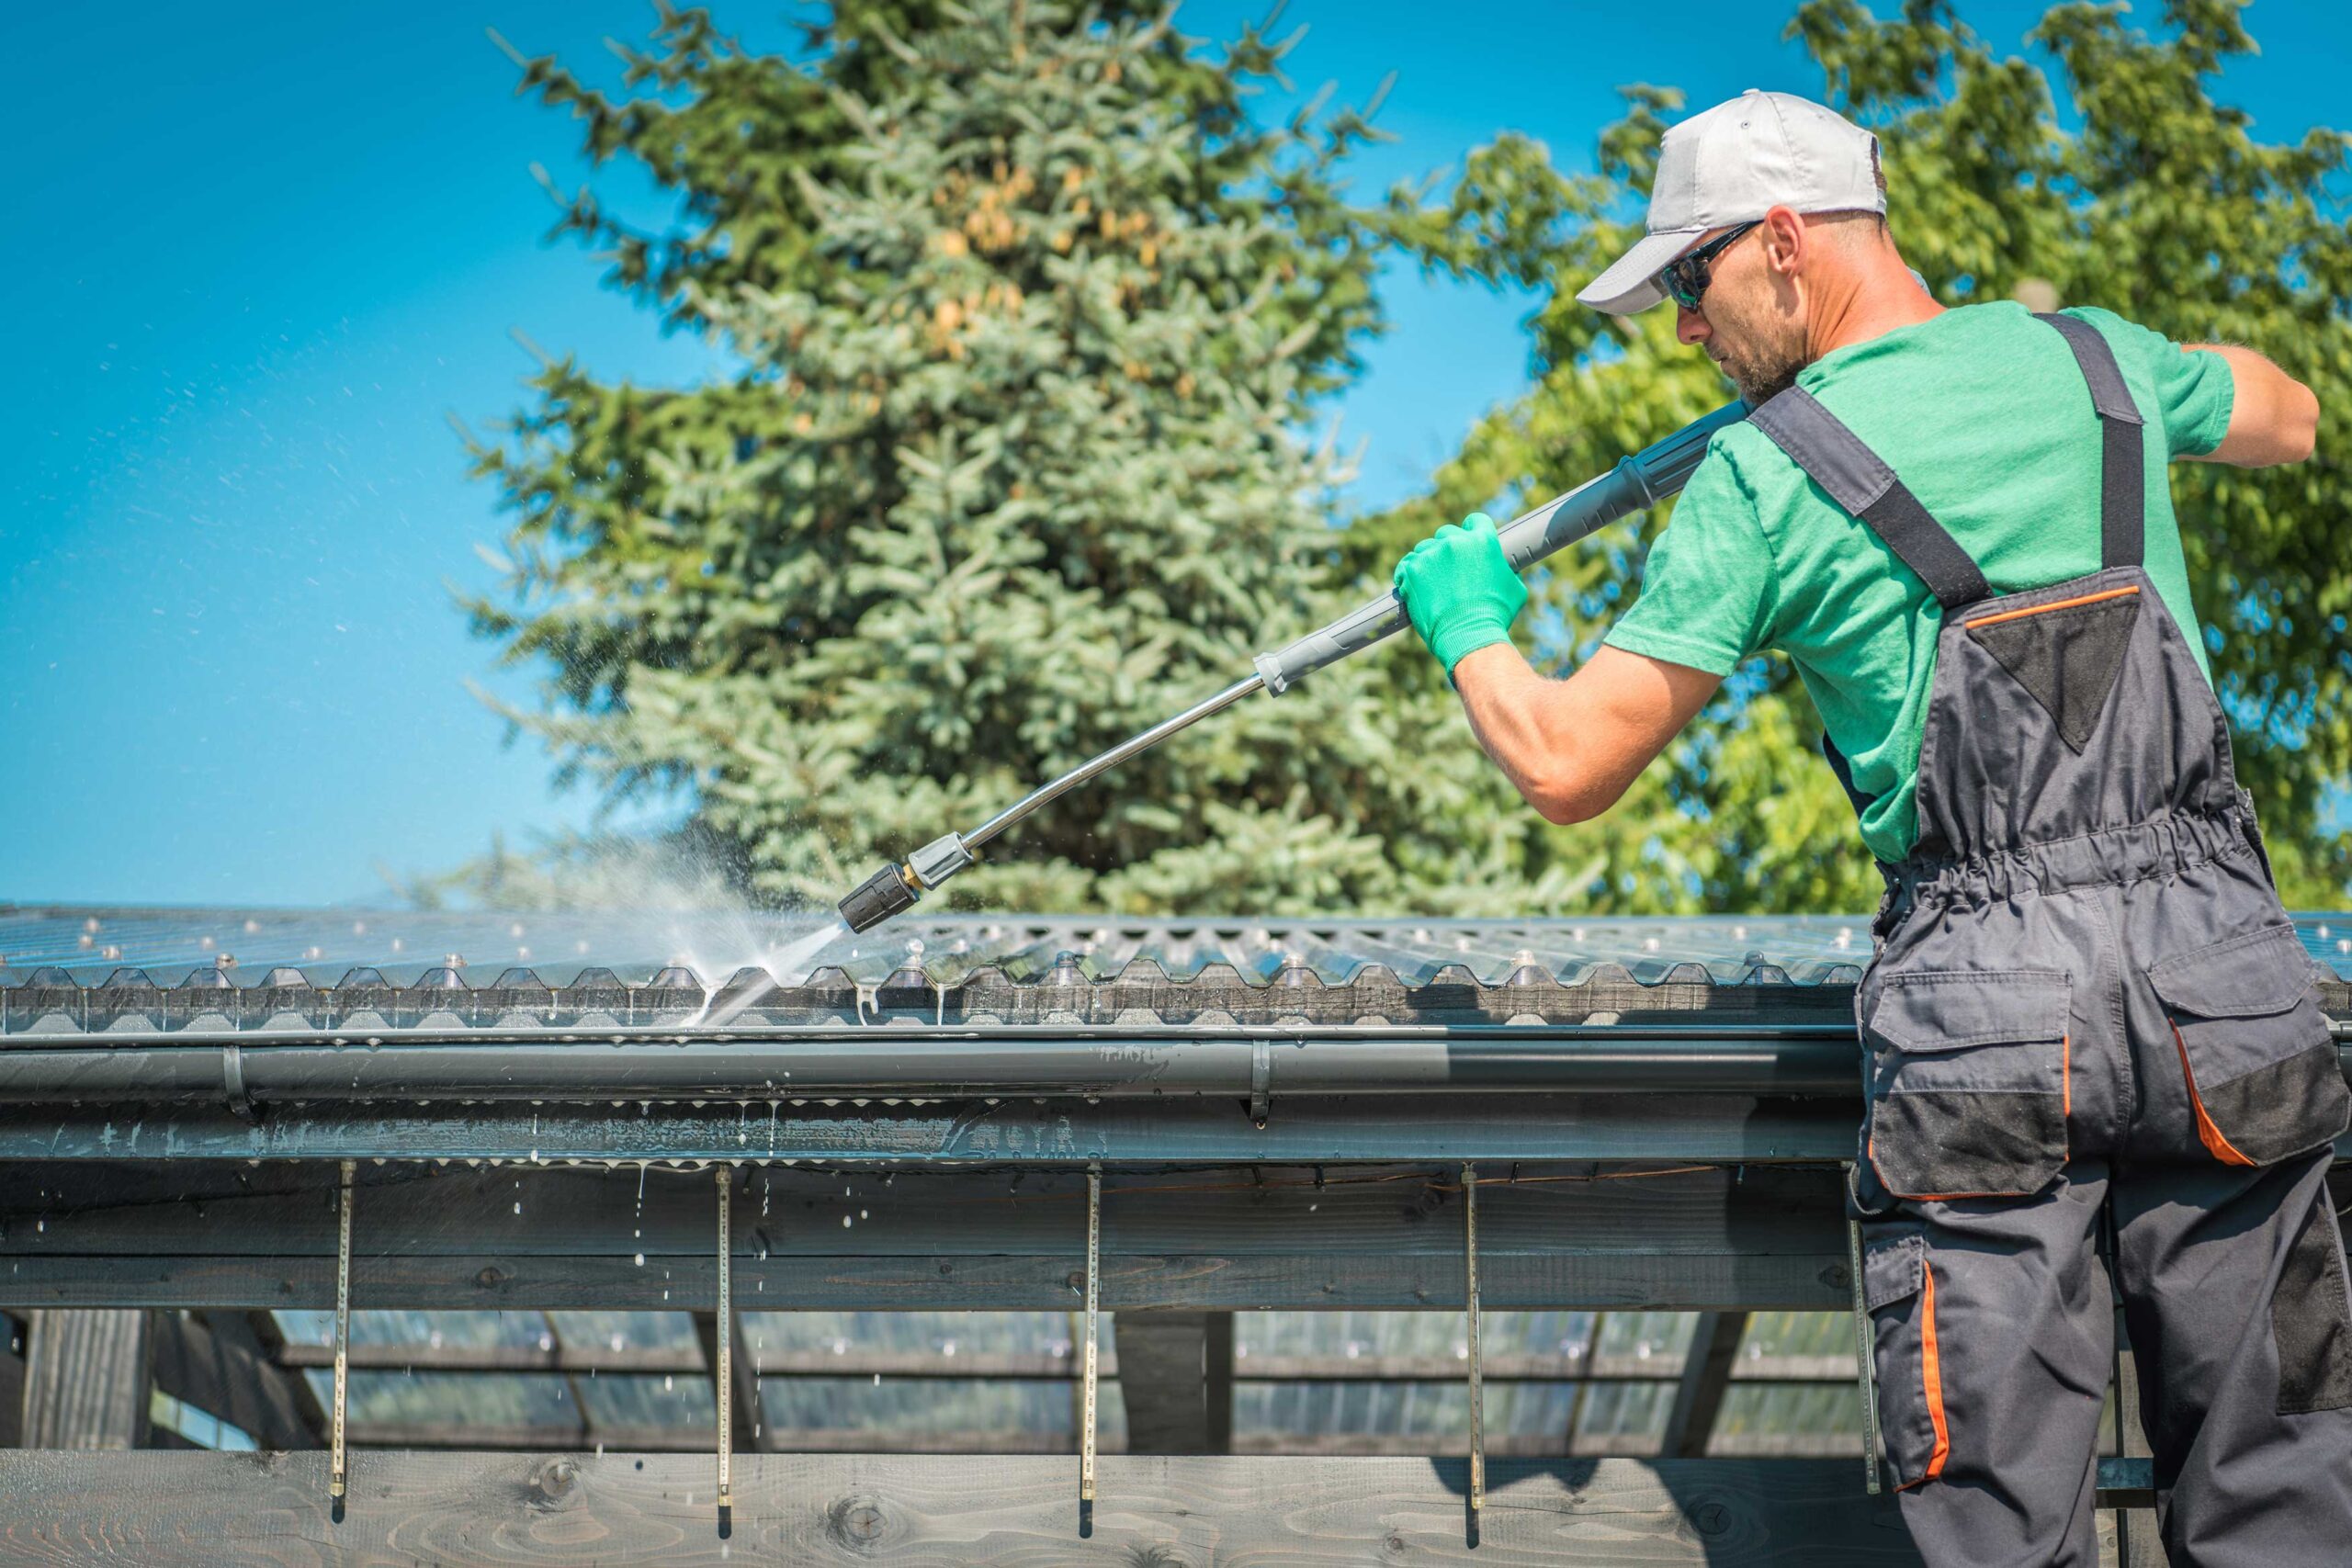 A man in a green t-shirt and dungarees cleaning a roof gutter with a high-pressure water spray, with trees and a clear blue sky in the background.